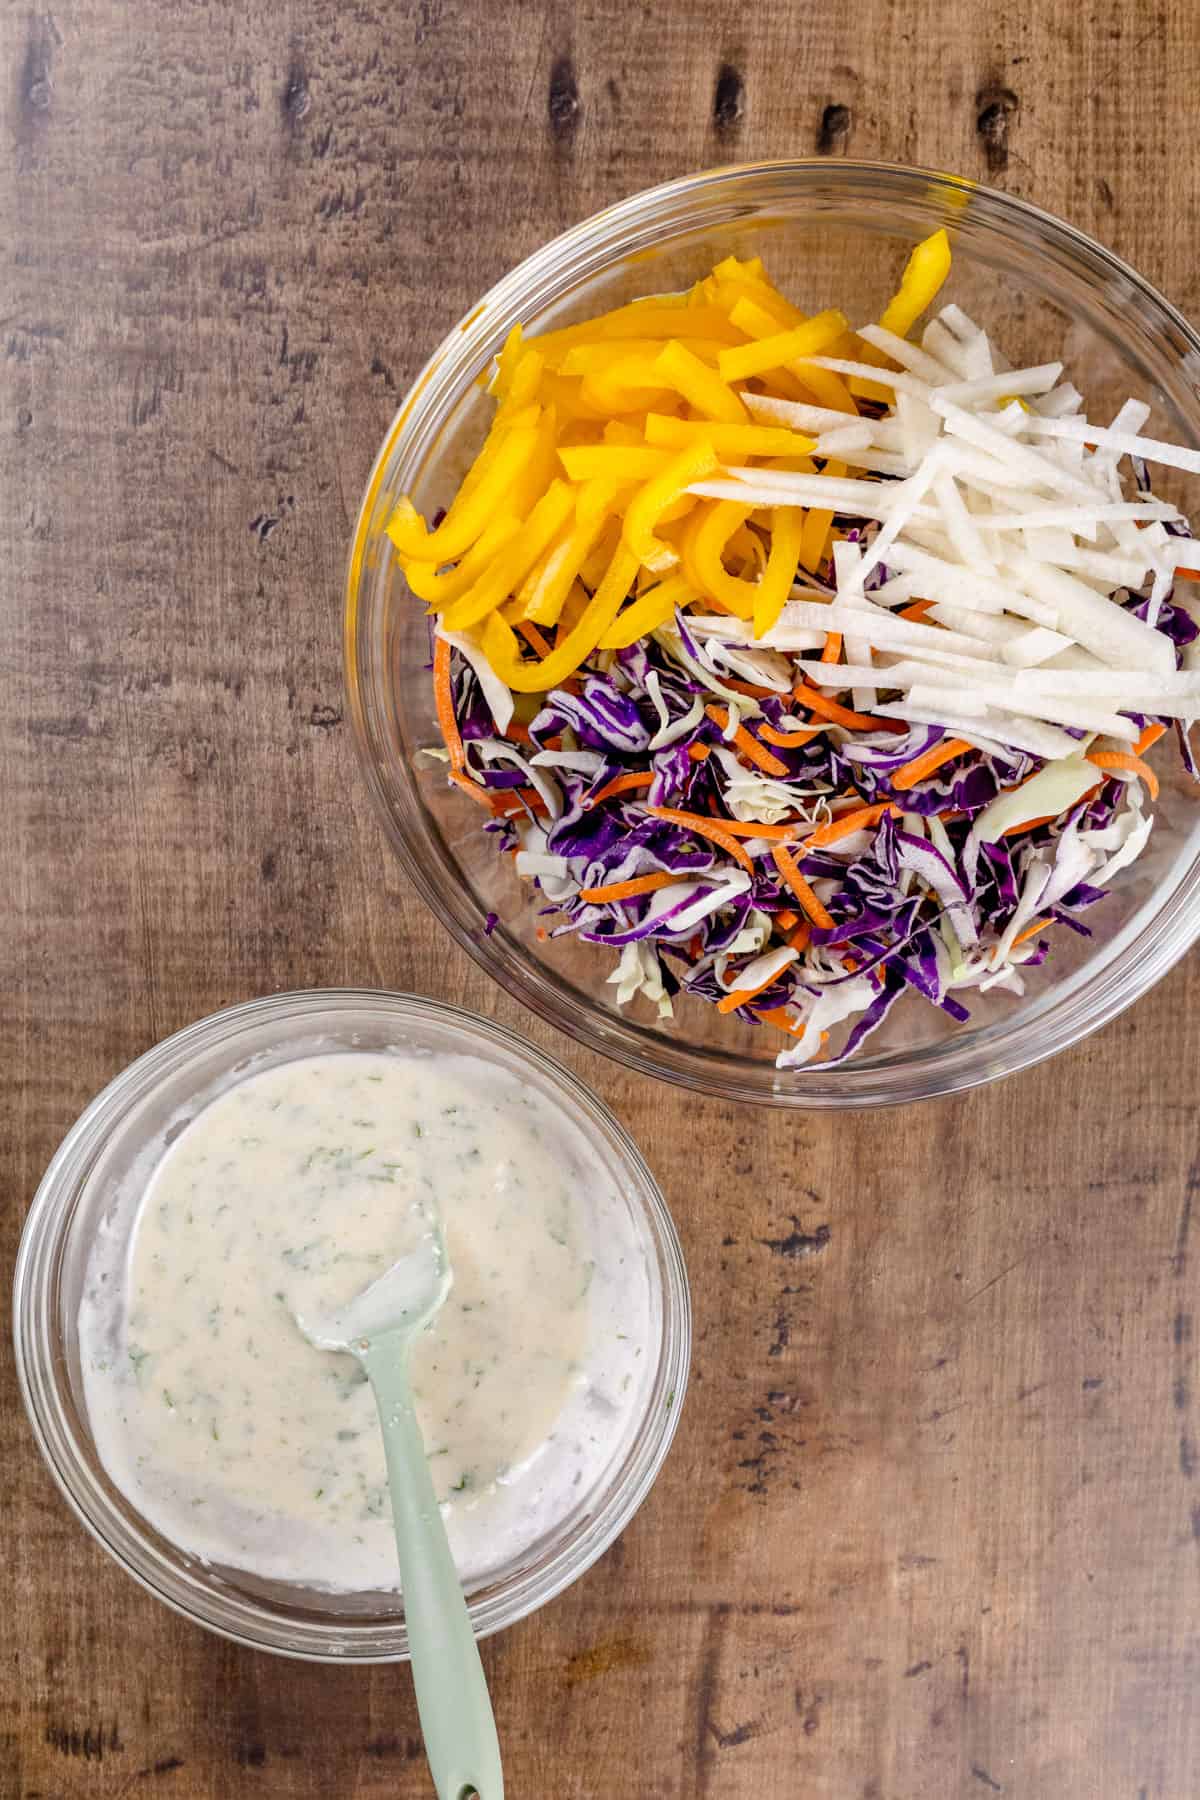 Two glass bowls, one filled with the coleslaw dressing and one filled with the coleslaw mix.